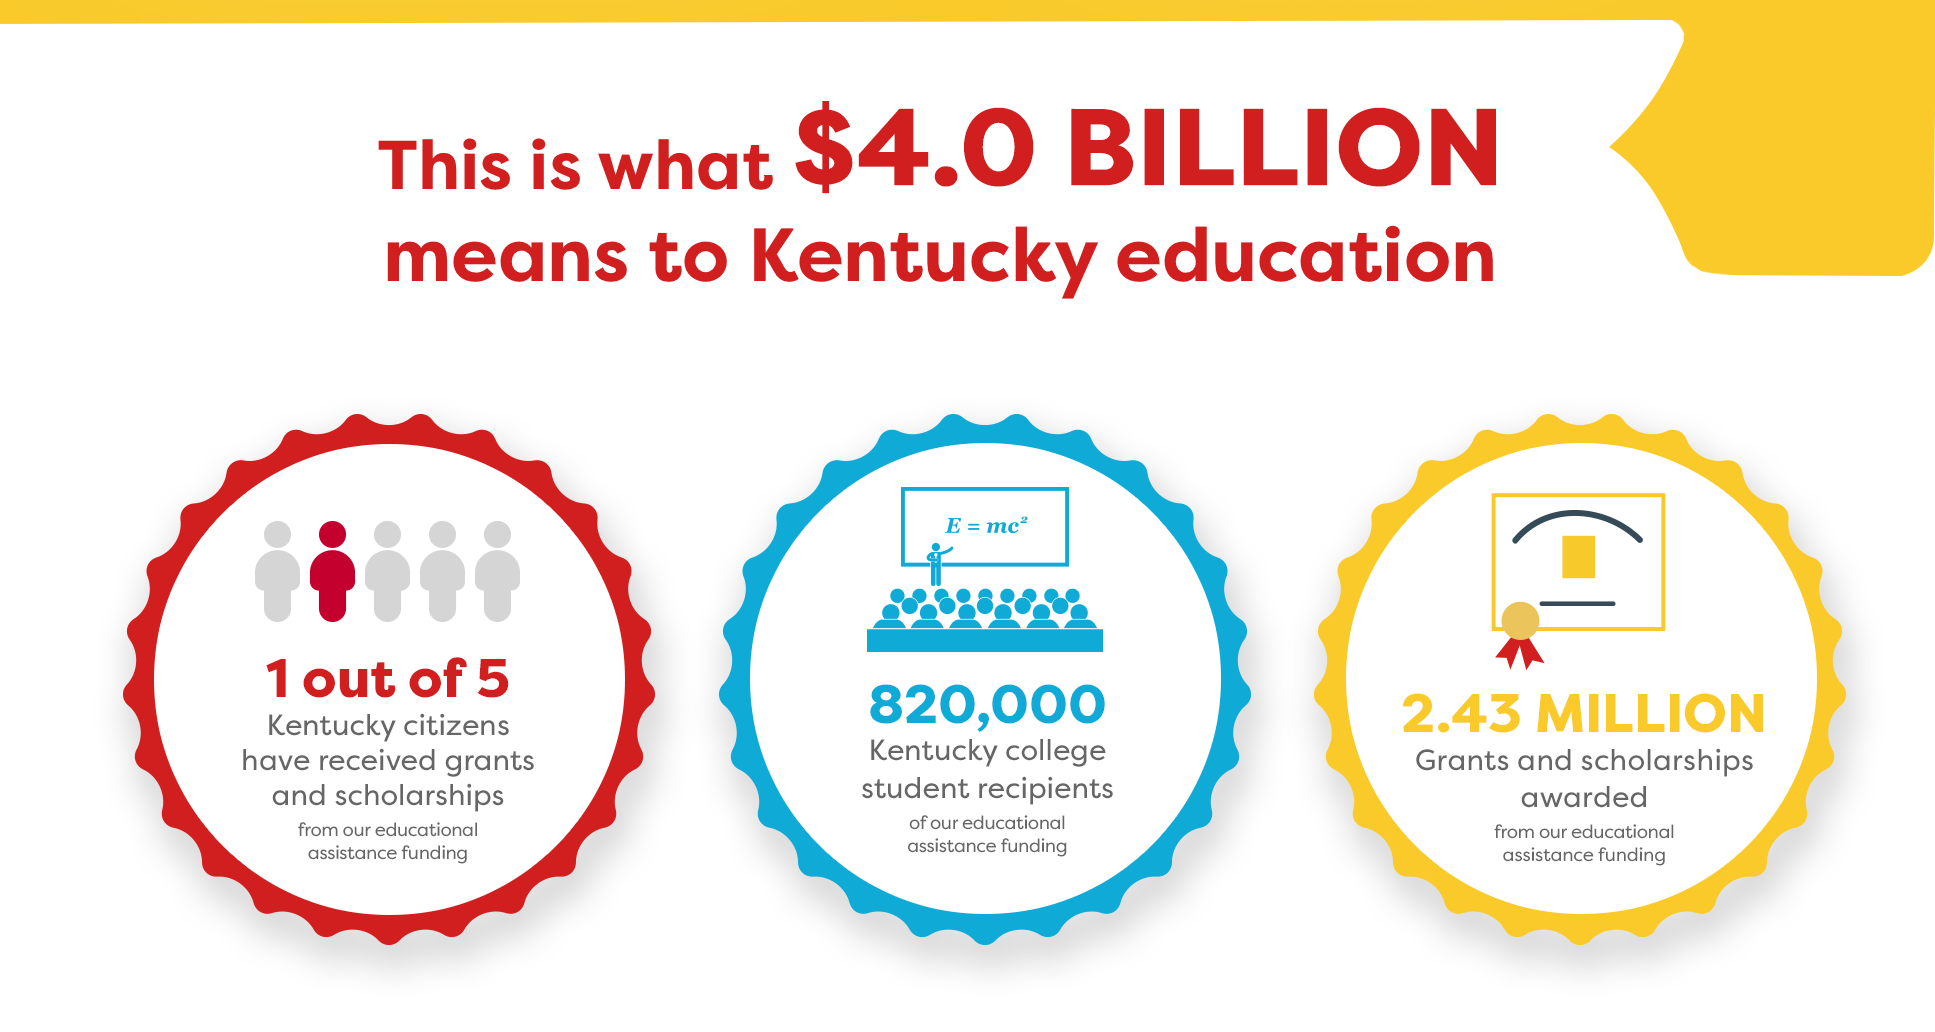 This is what $4.0 Billion means 1 out of 5 KY citizens received grants and scholarships, 860,000 KY college recipients, 2.59 Million grants and scholarships awarded